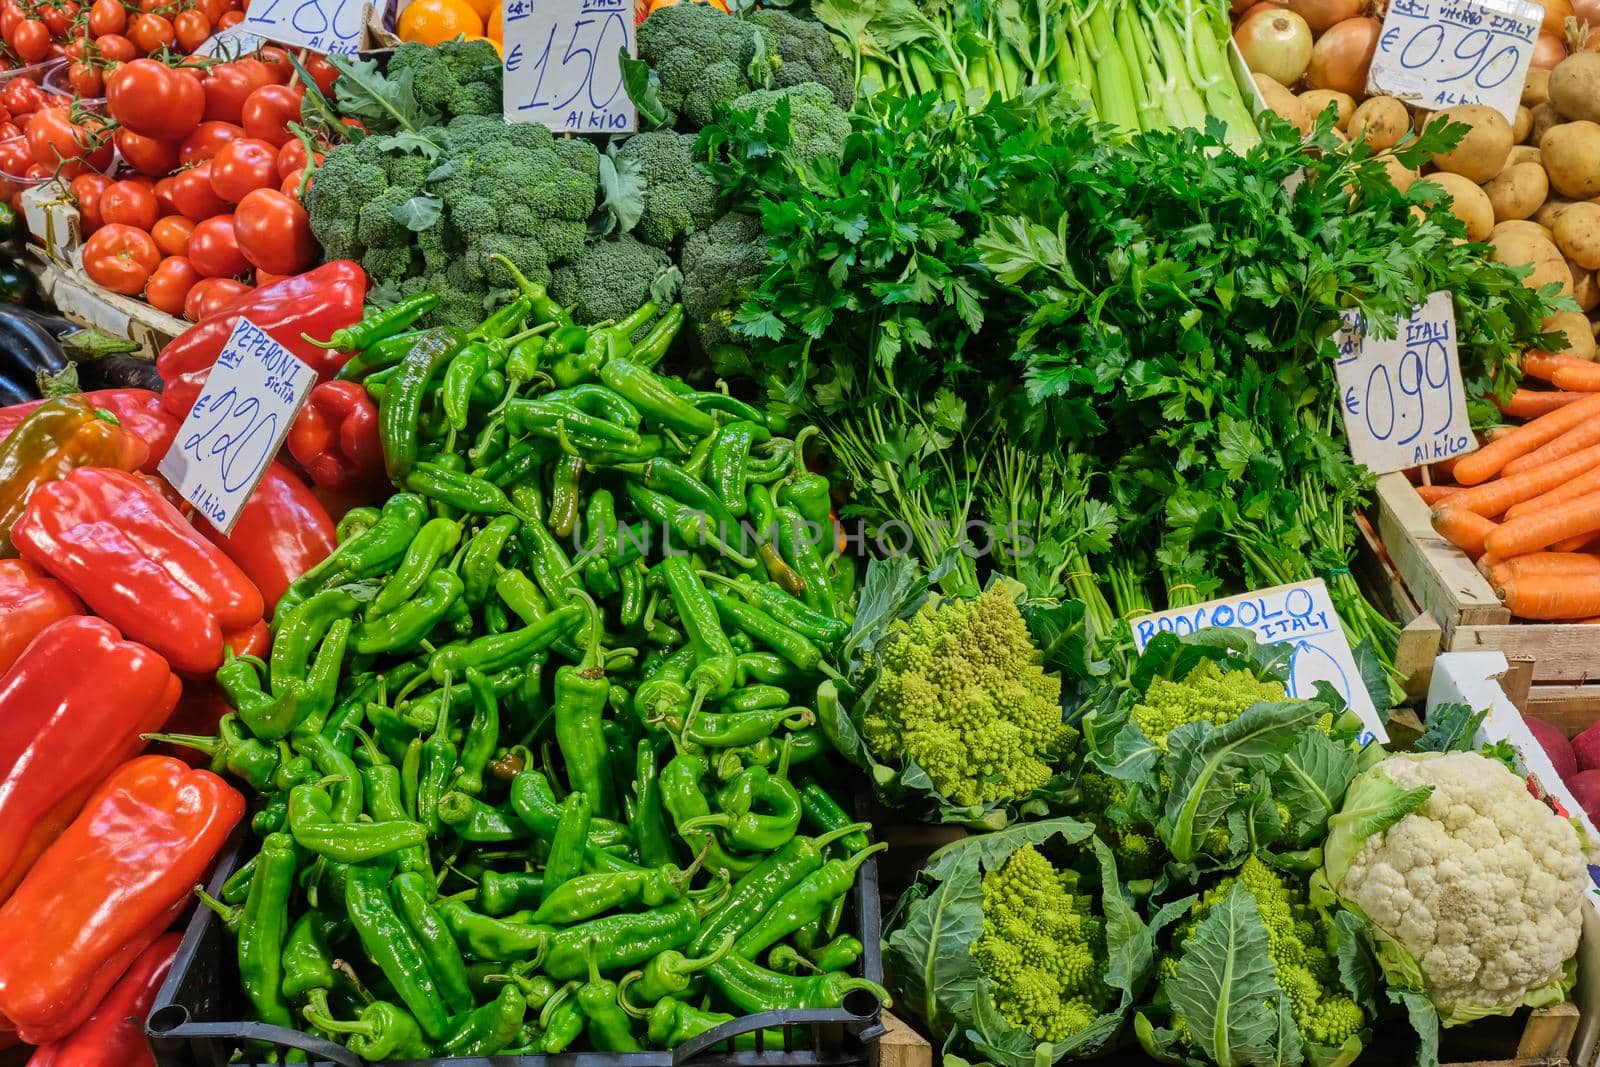 Chili, broccoli and other vegetables for sale at a market